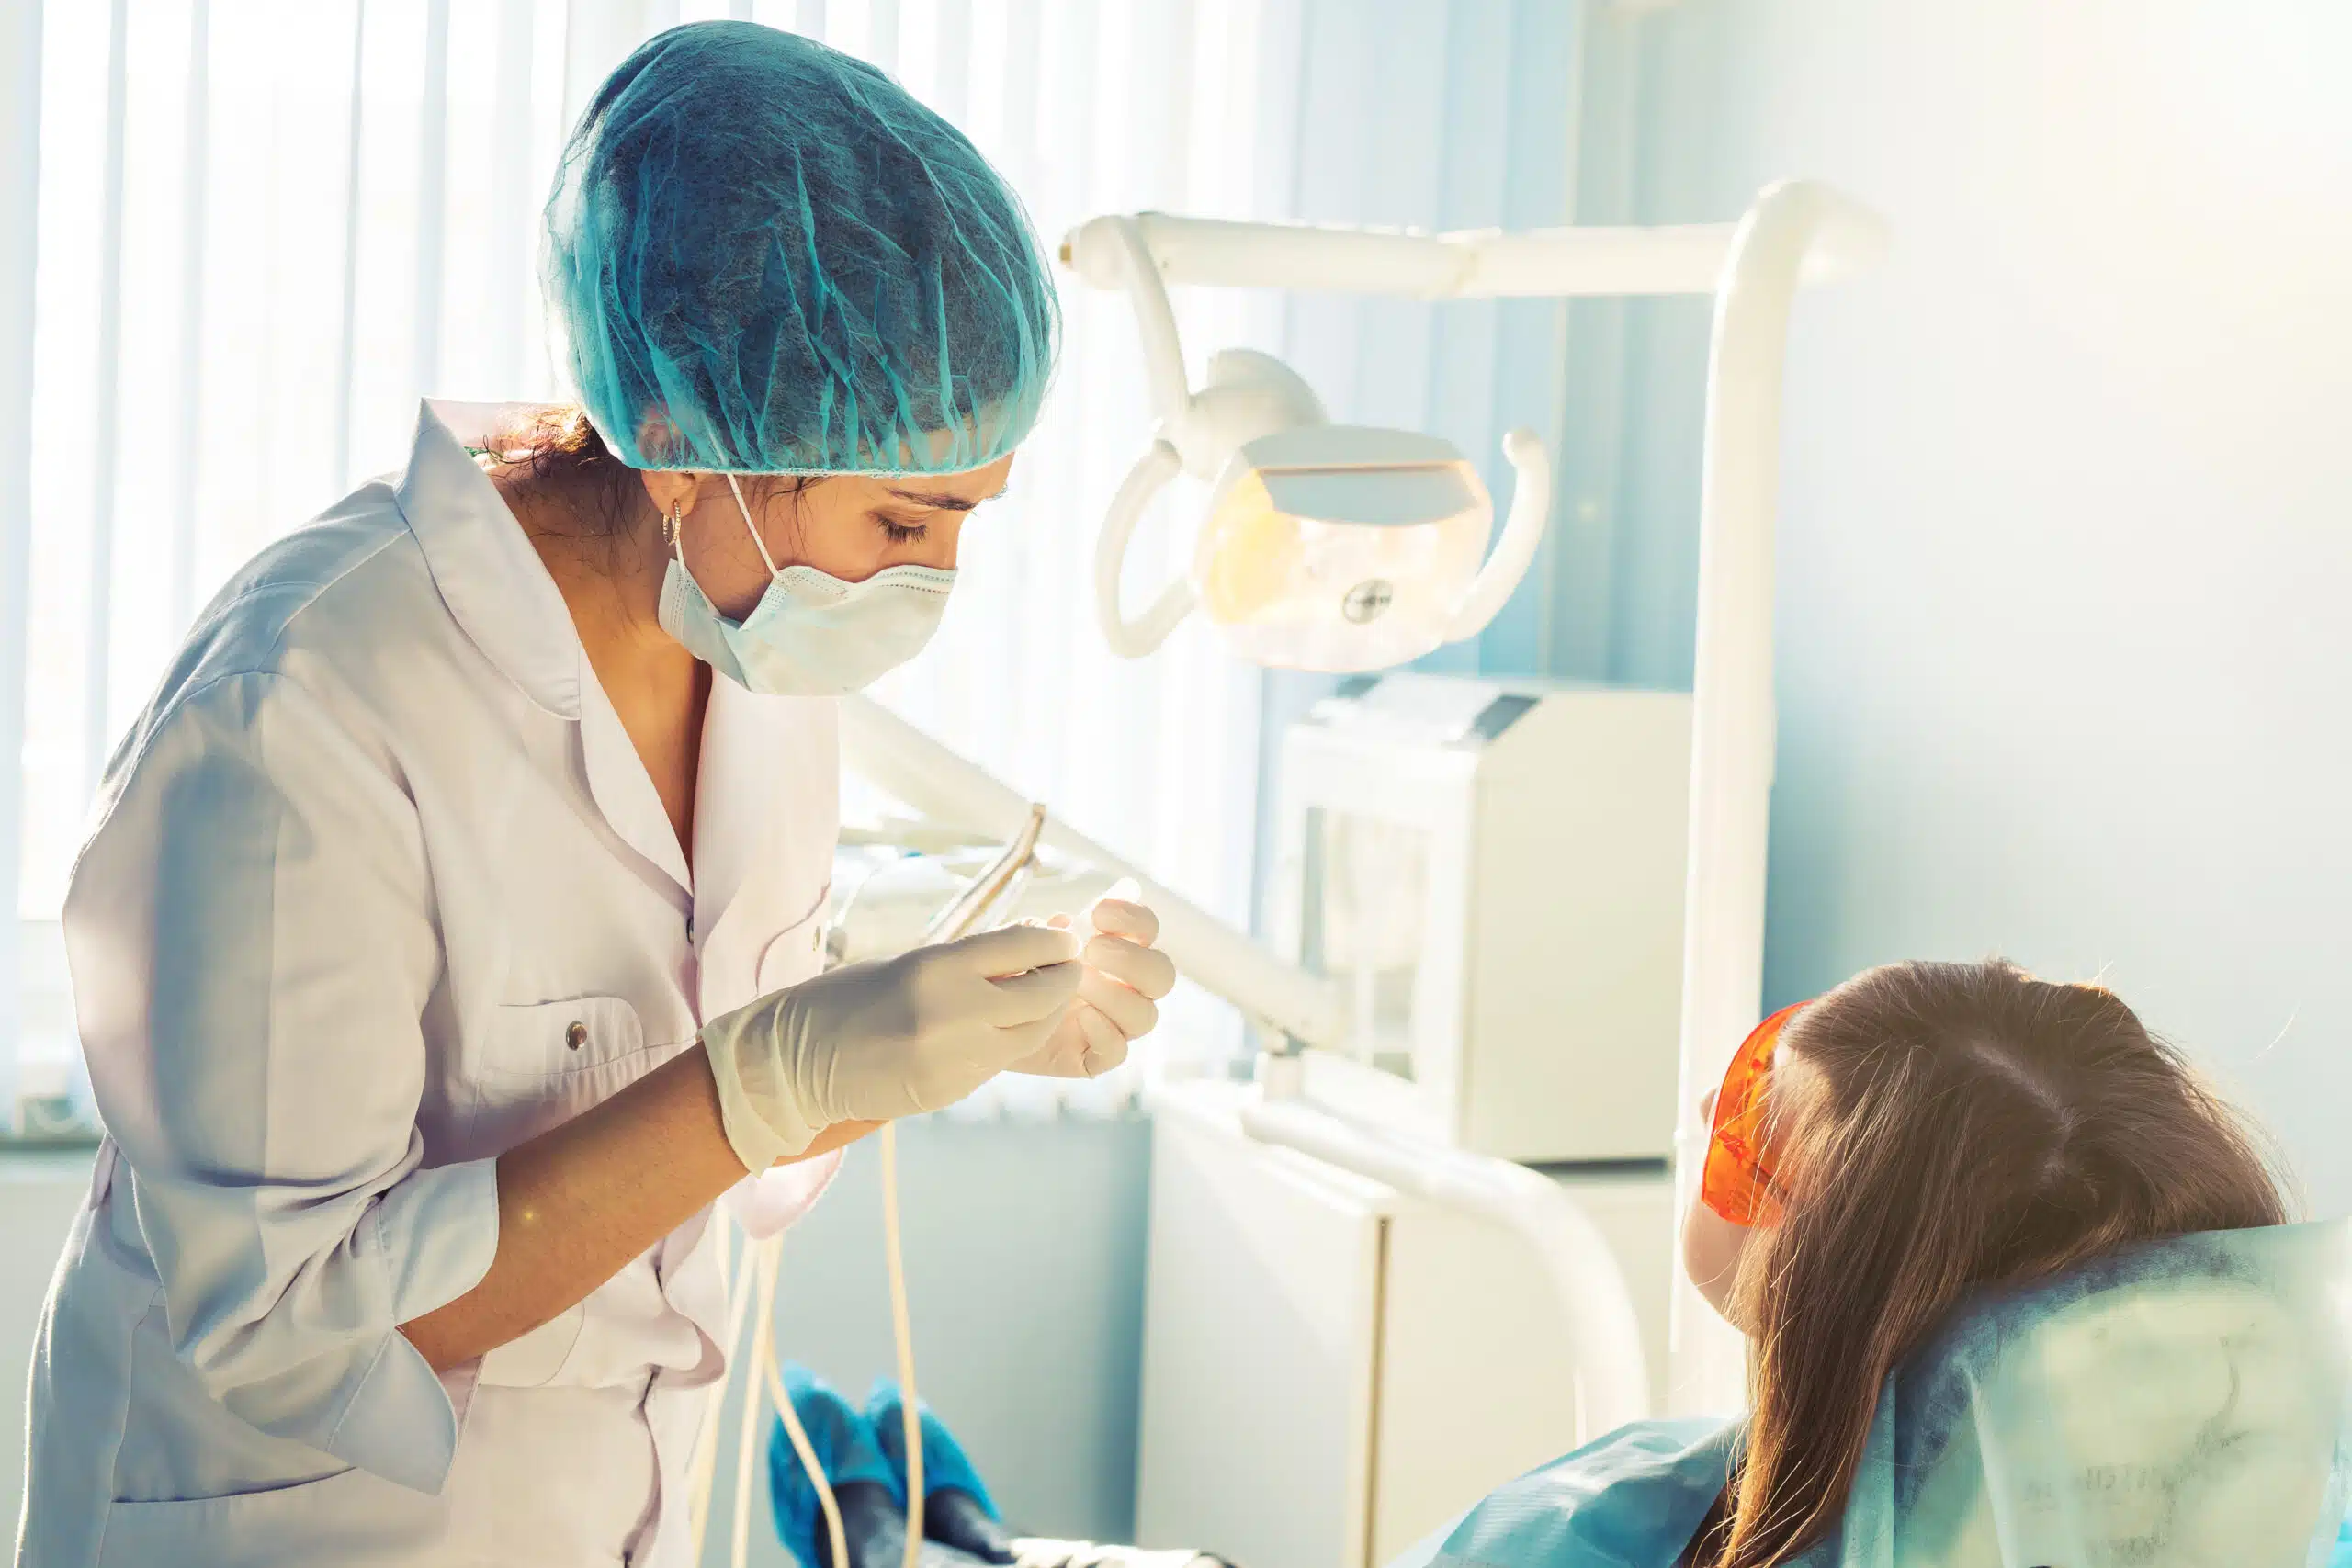 Our team uses the latest techniques and technologies to ensure a safe oral surgical experience for your child.